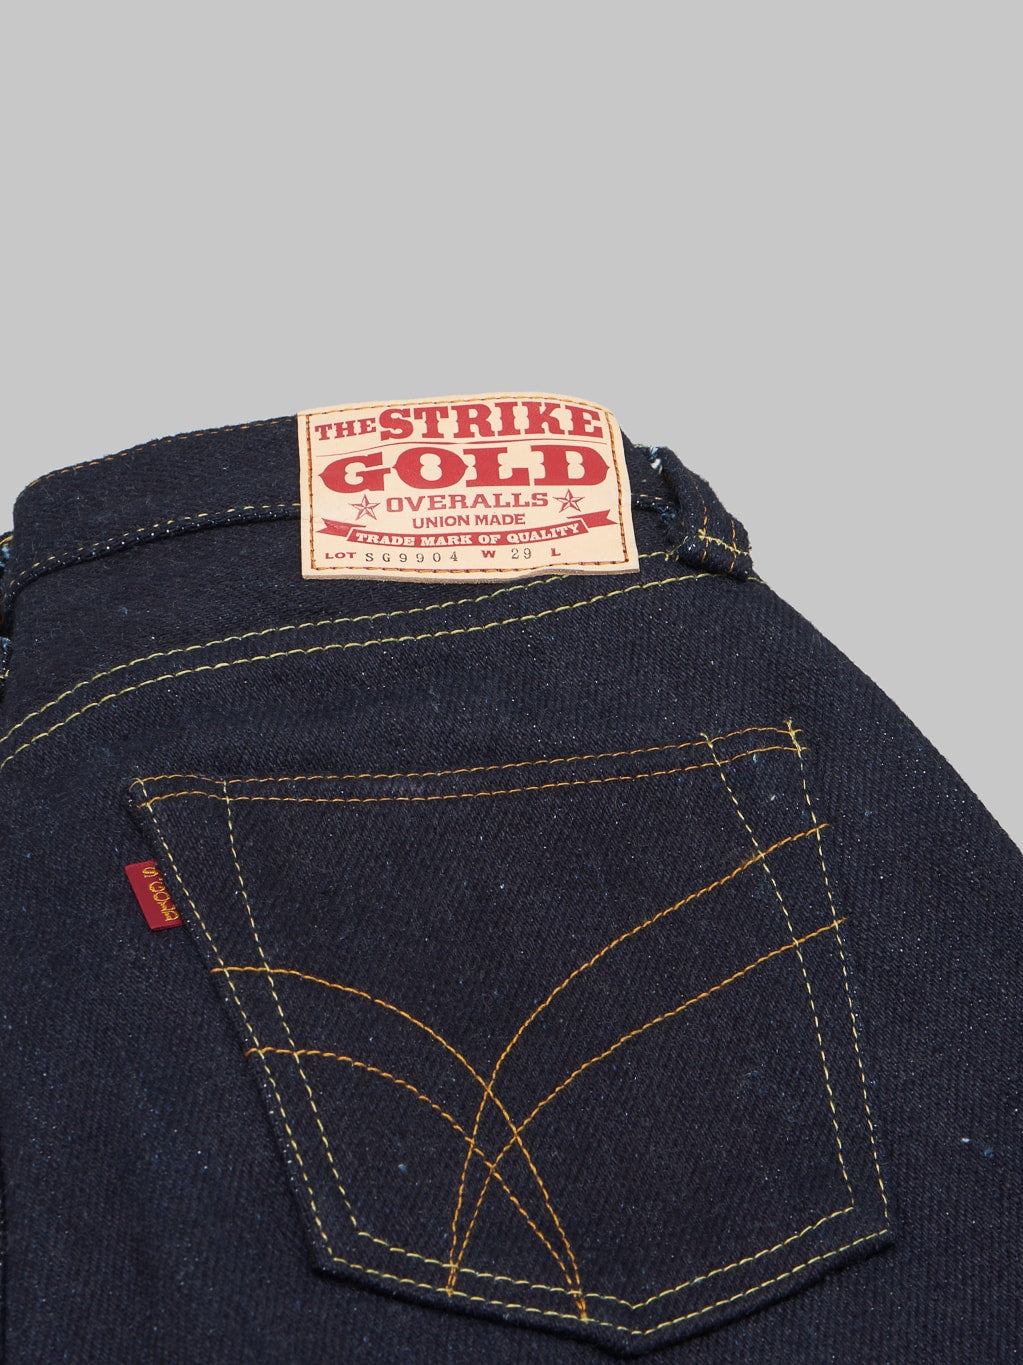 The Strike Gold Extra Heavyweight straight tapered jeans fabric texture